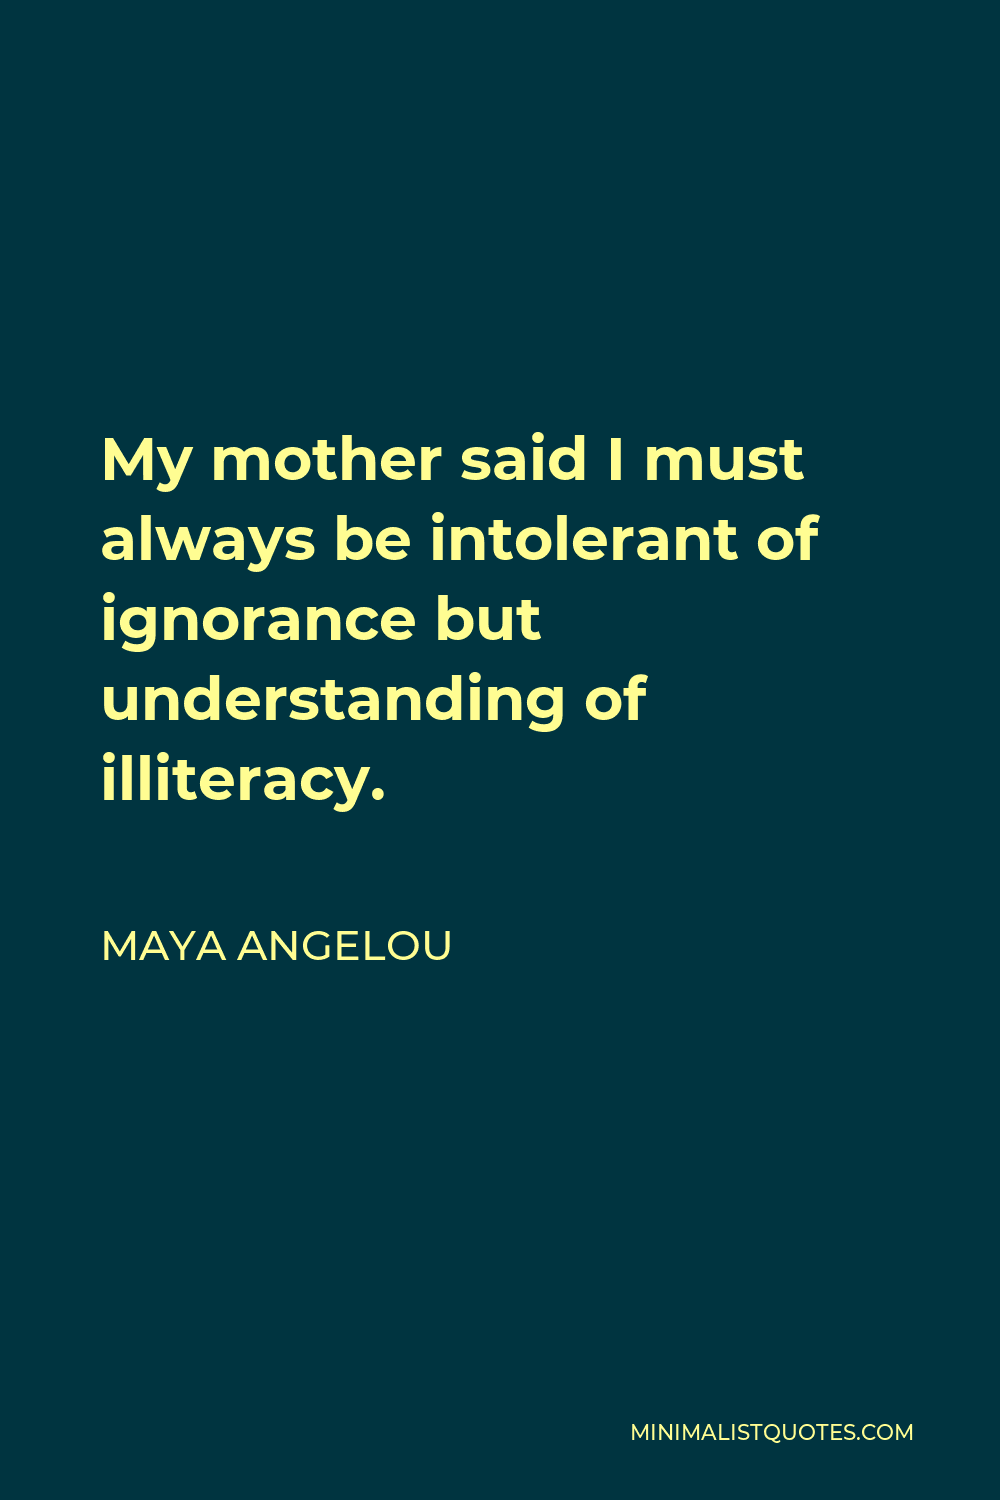 Maya Angelou Quote - My mother said I must always be intolerant of ignorance but understanding of illiteracy.